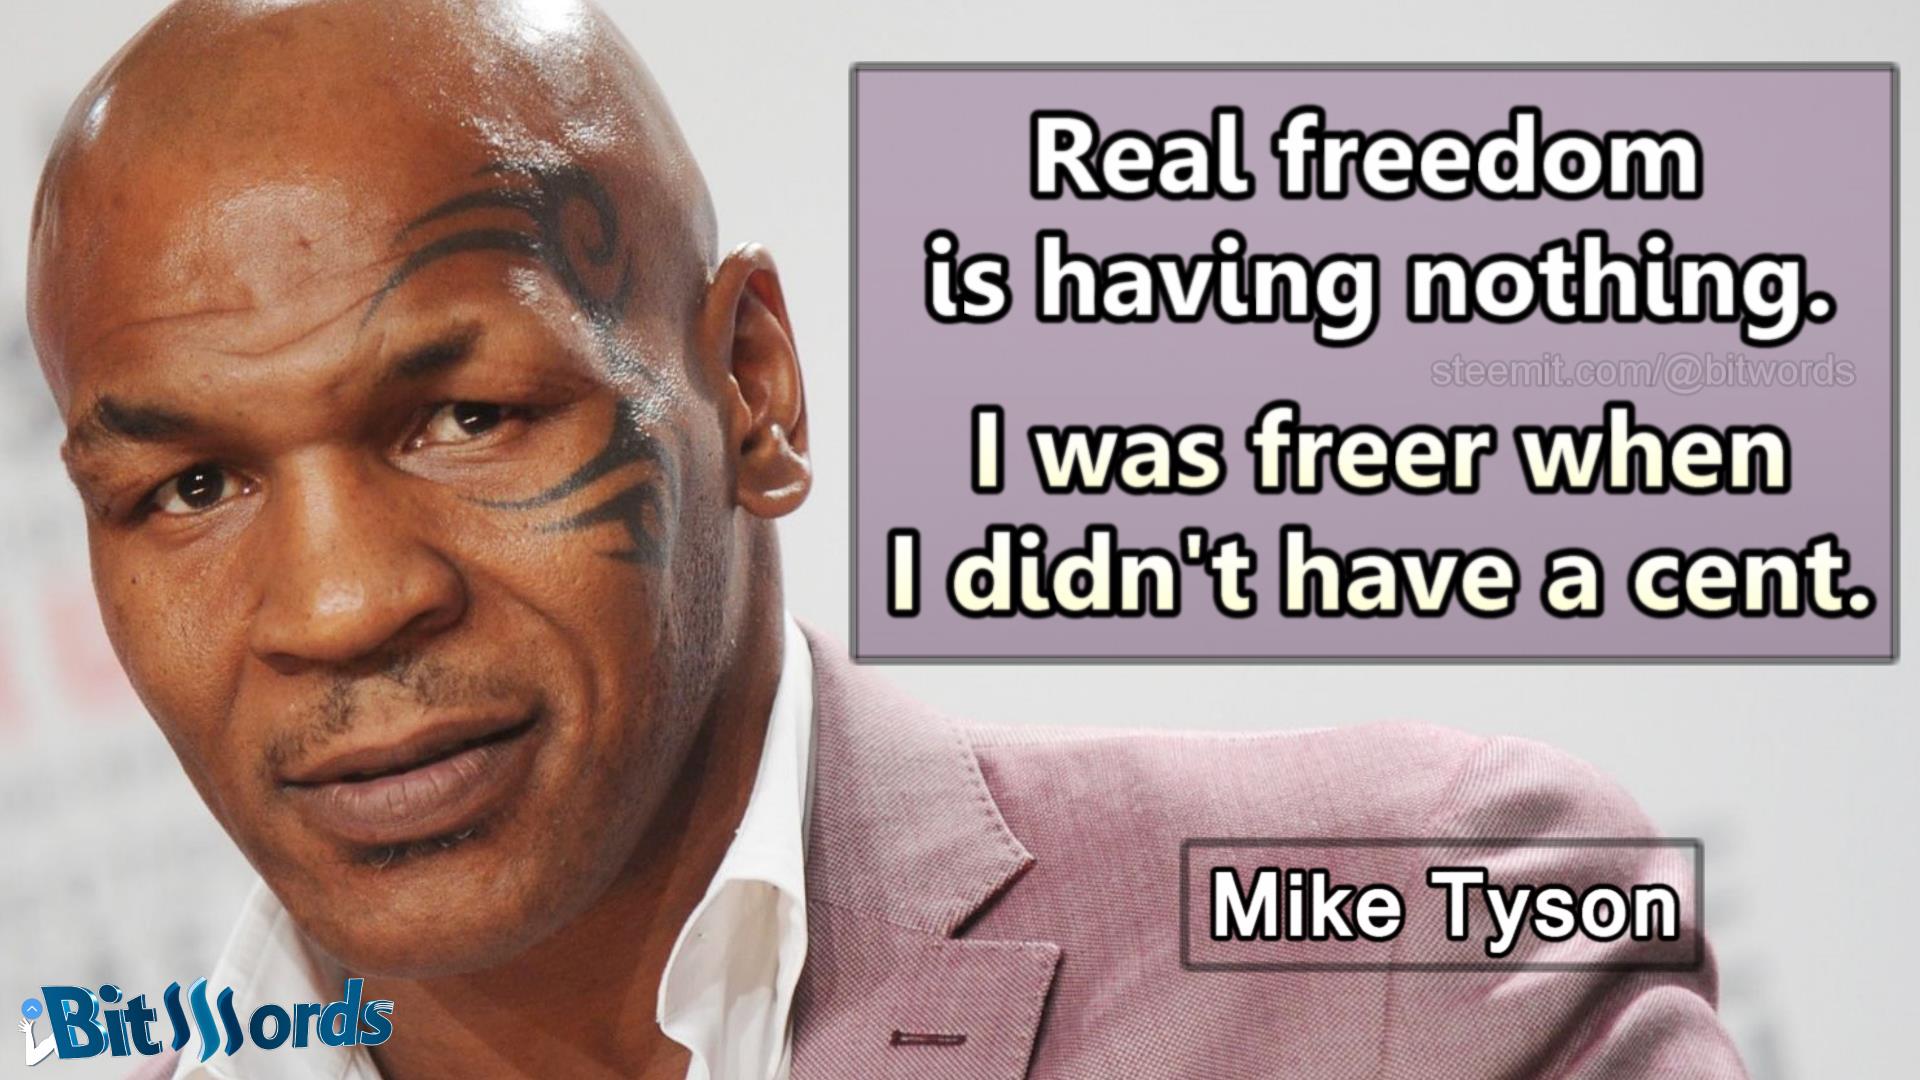 bitwords steemit quote of the day Real freedom is having nothing. I was freer when I didn't have a cent. mike tyson.jpg